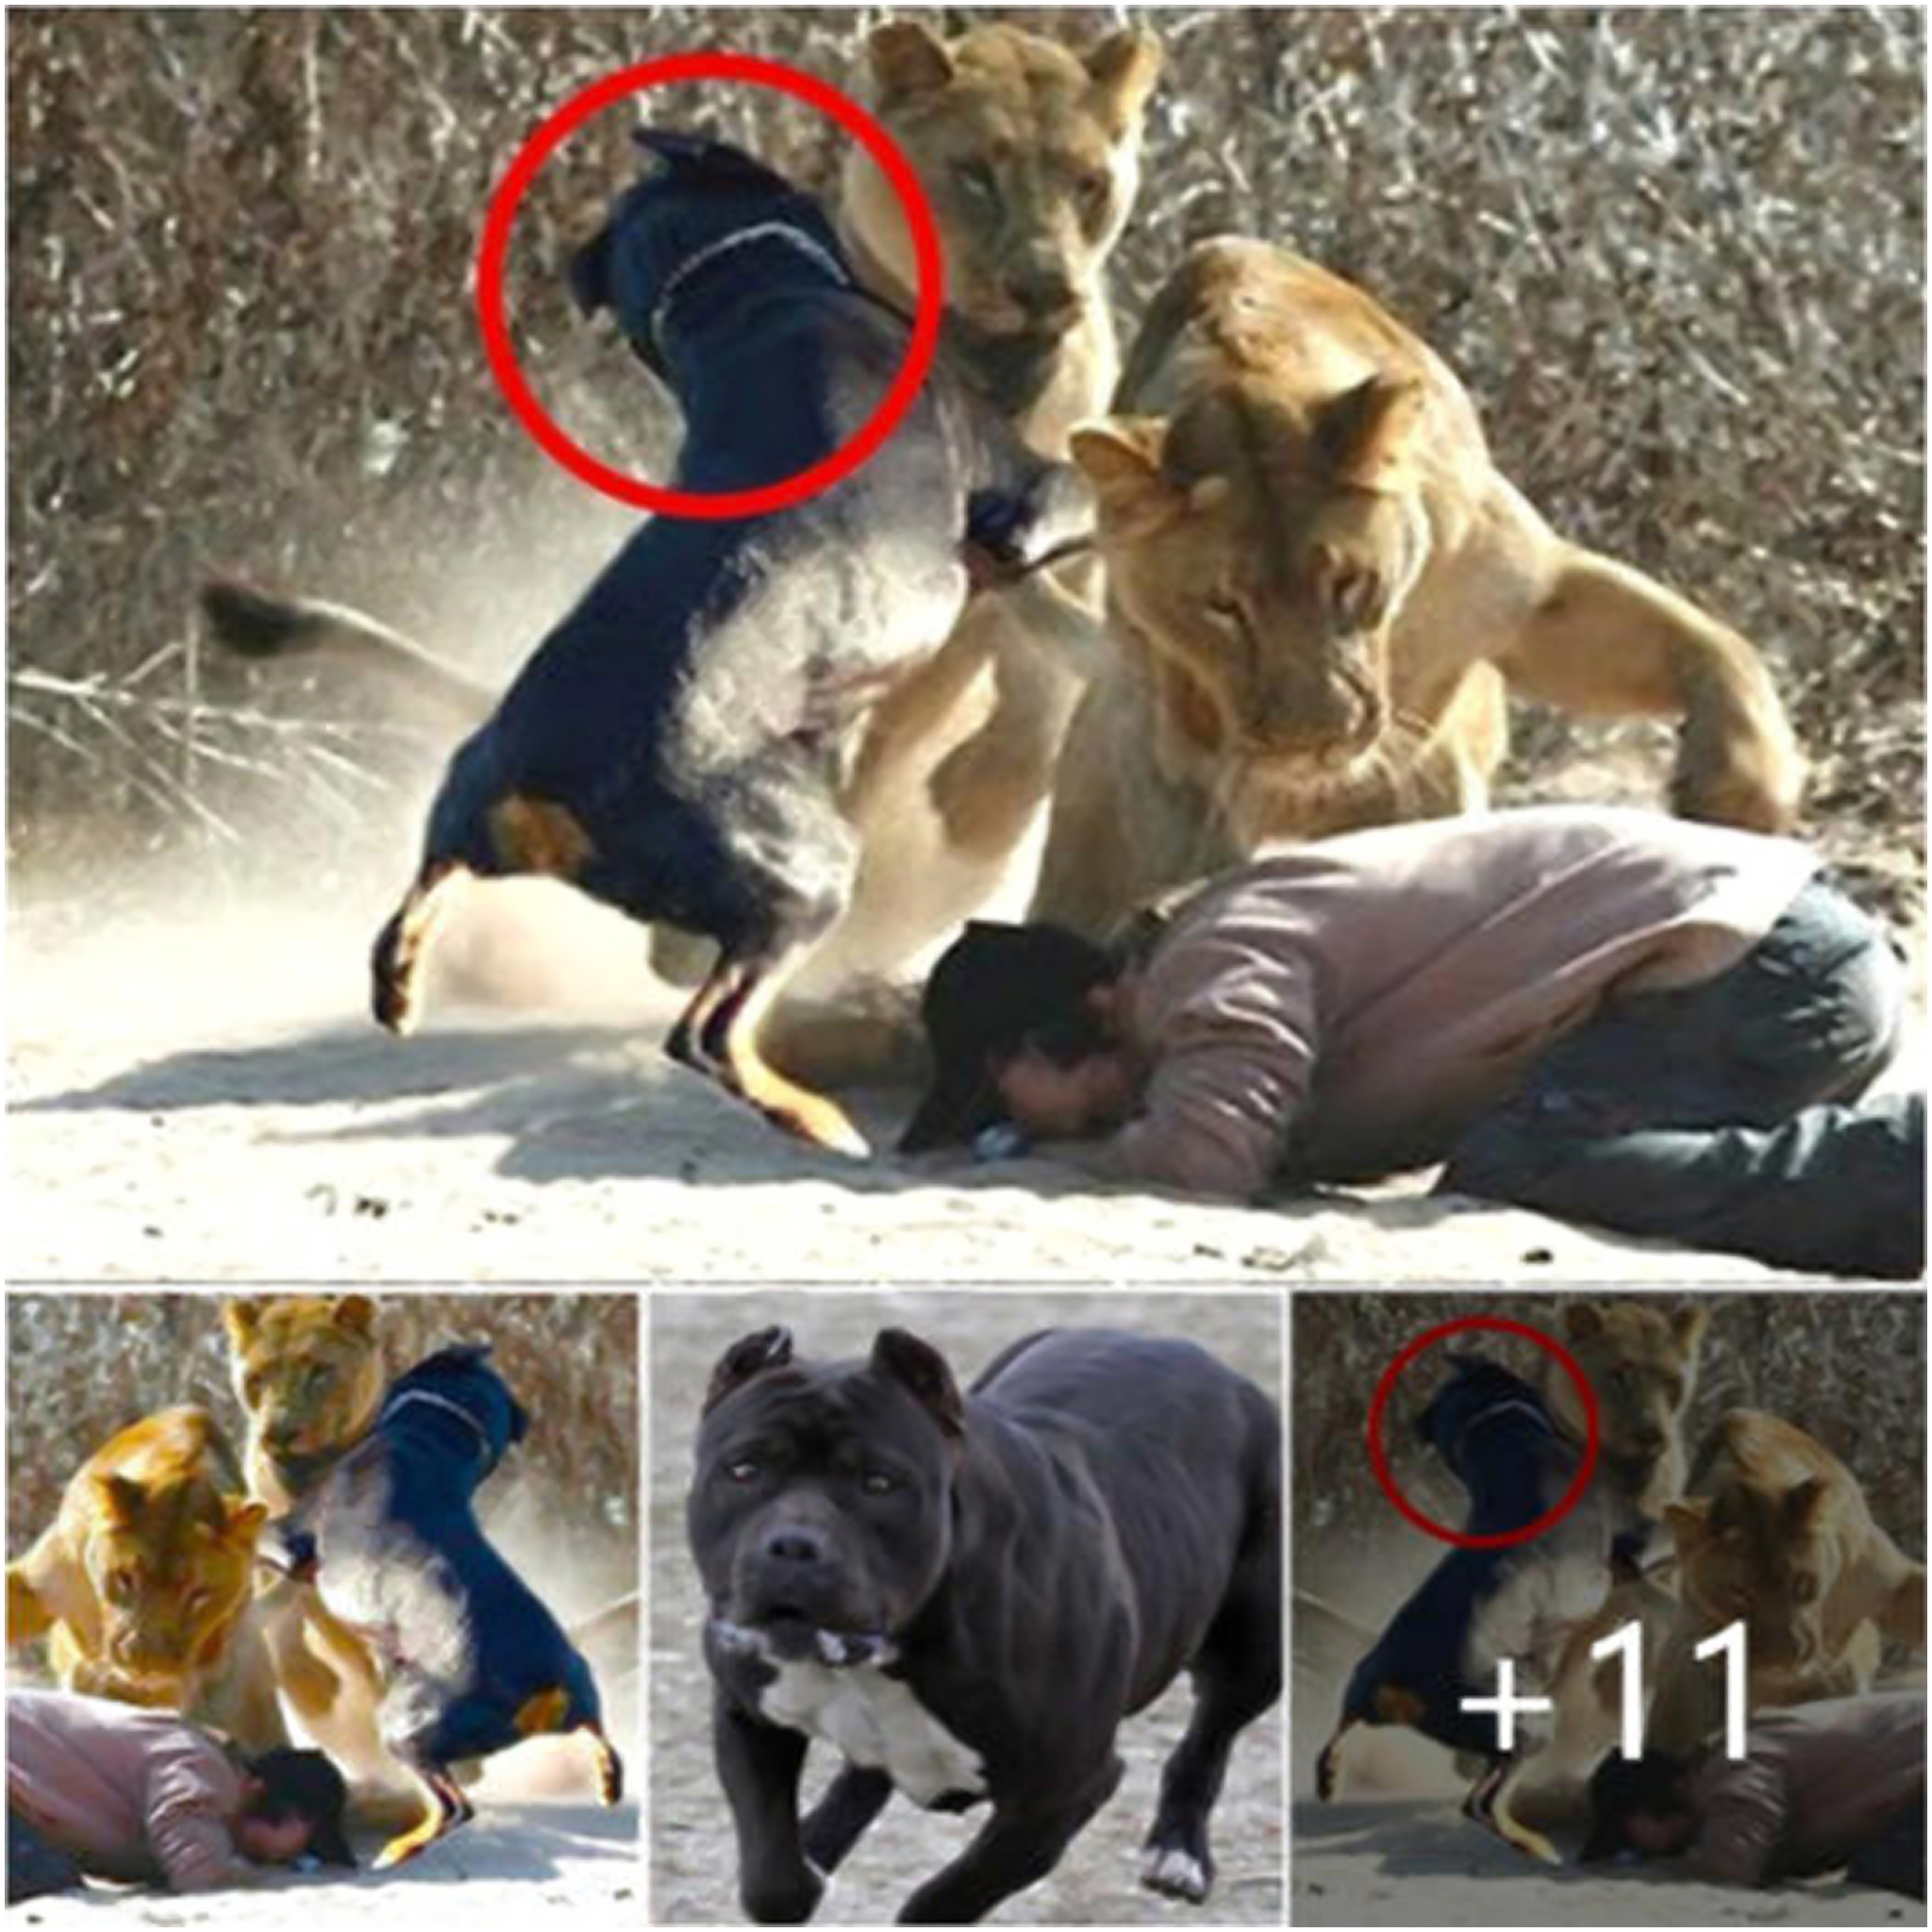 “Daring Canine Heroism: Fearless Dog Rides a Lion to Rescue Owner in an Astonishing Display of Bravery.”